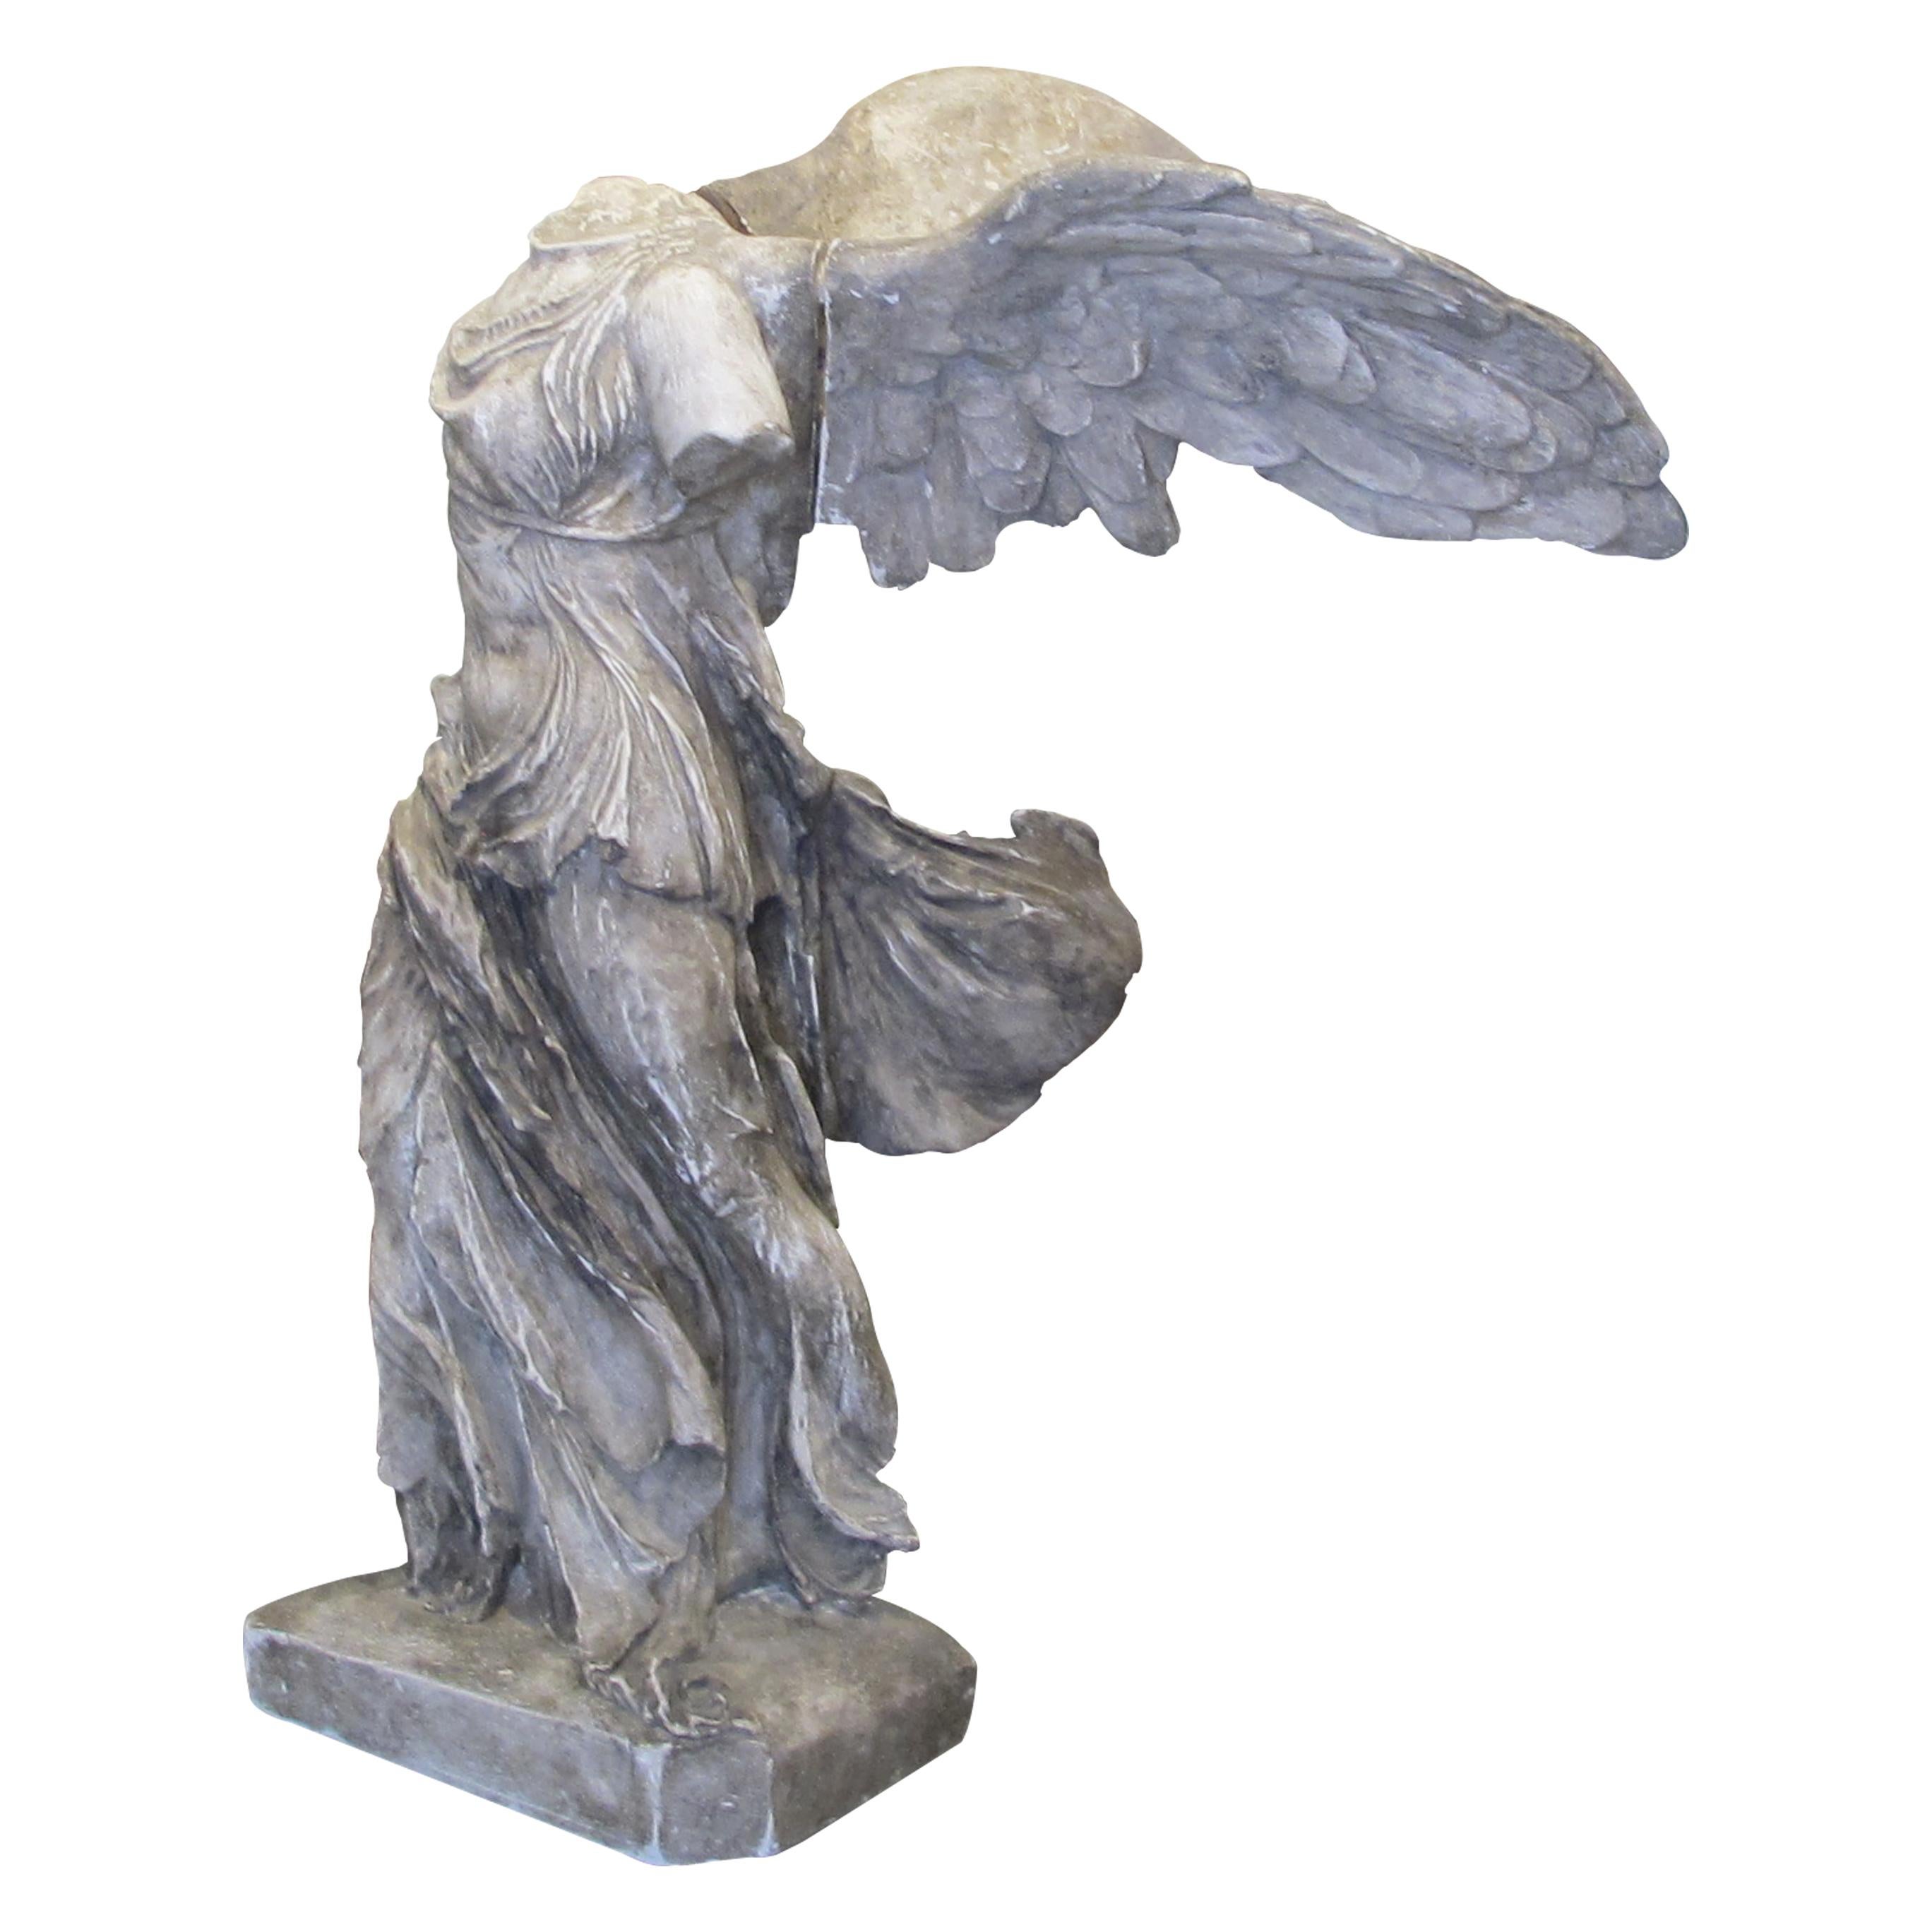 Highly decorative late 19th Century Nike plaster statue goddess of victory known as “Nike (Winged Victory) of Samothrace”. This late reproduction based on the original statue currently at the Louvre Museum in Paris has two removable wings held in by